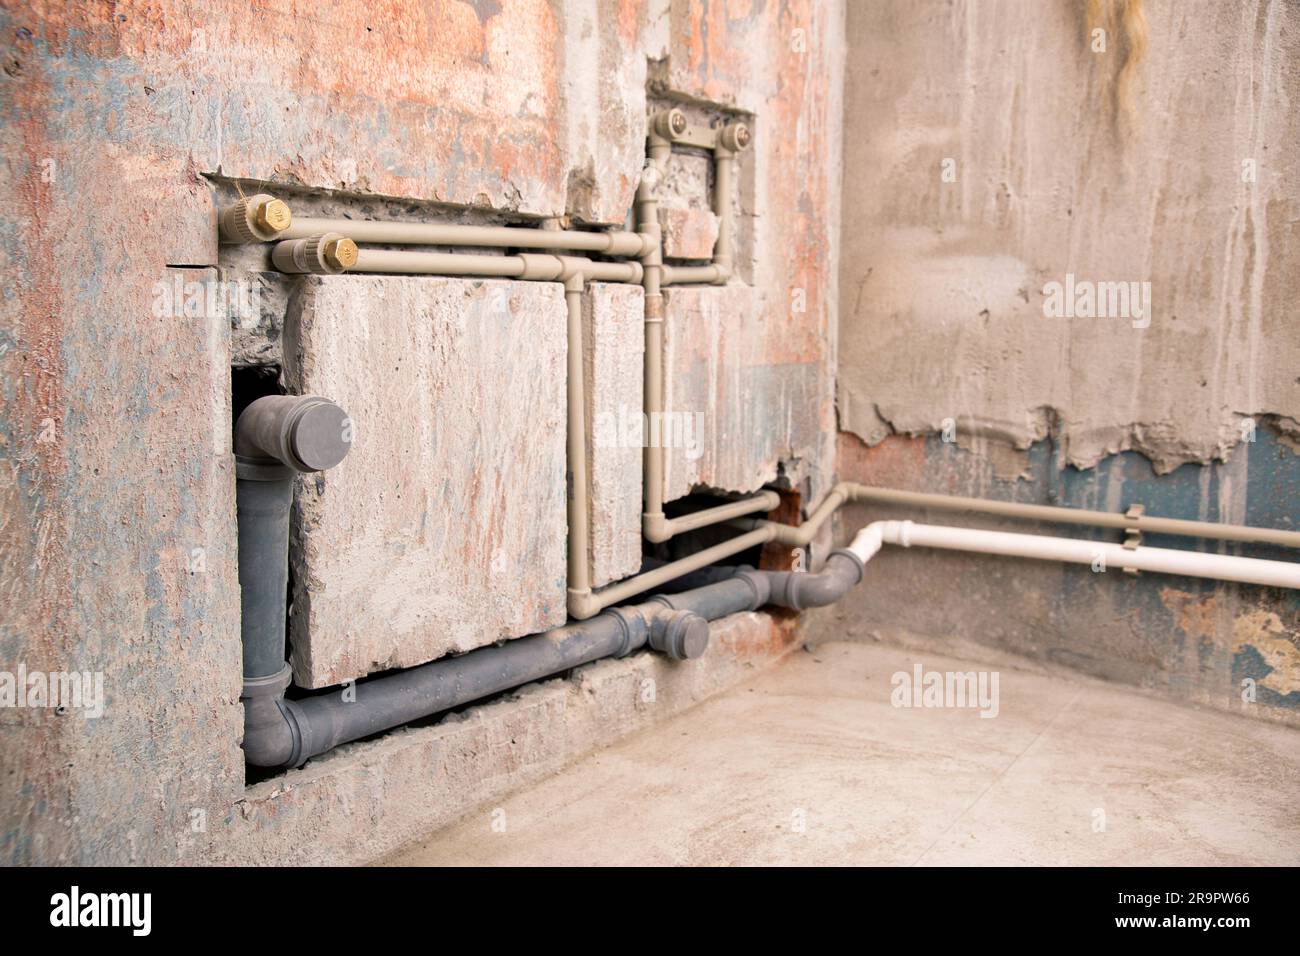 Supply of polypropylene water pipes in the wall and sewerage drain. Stock Photo